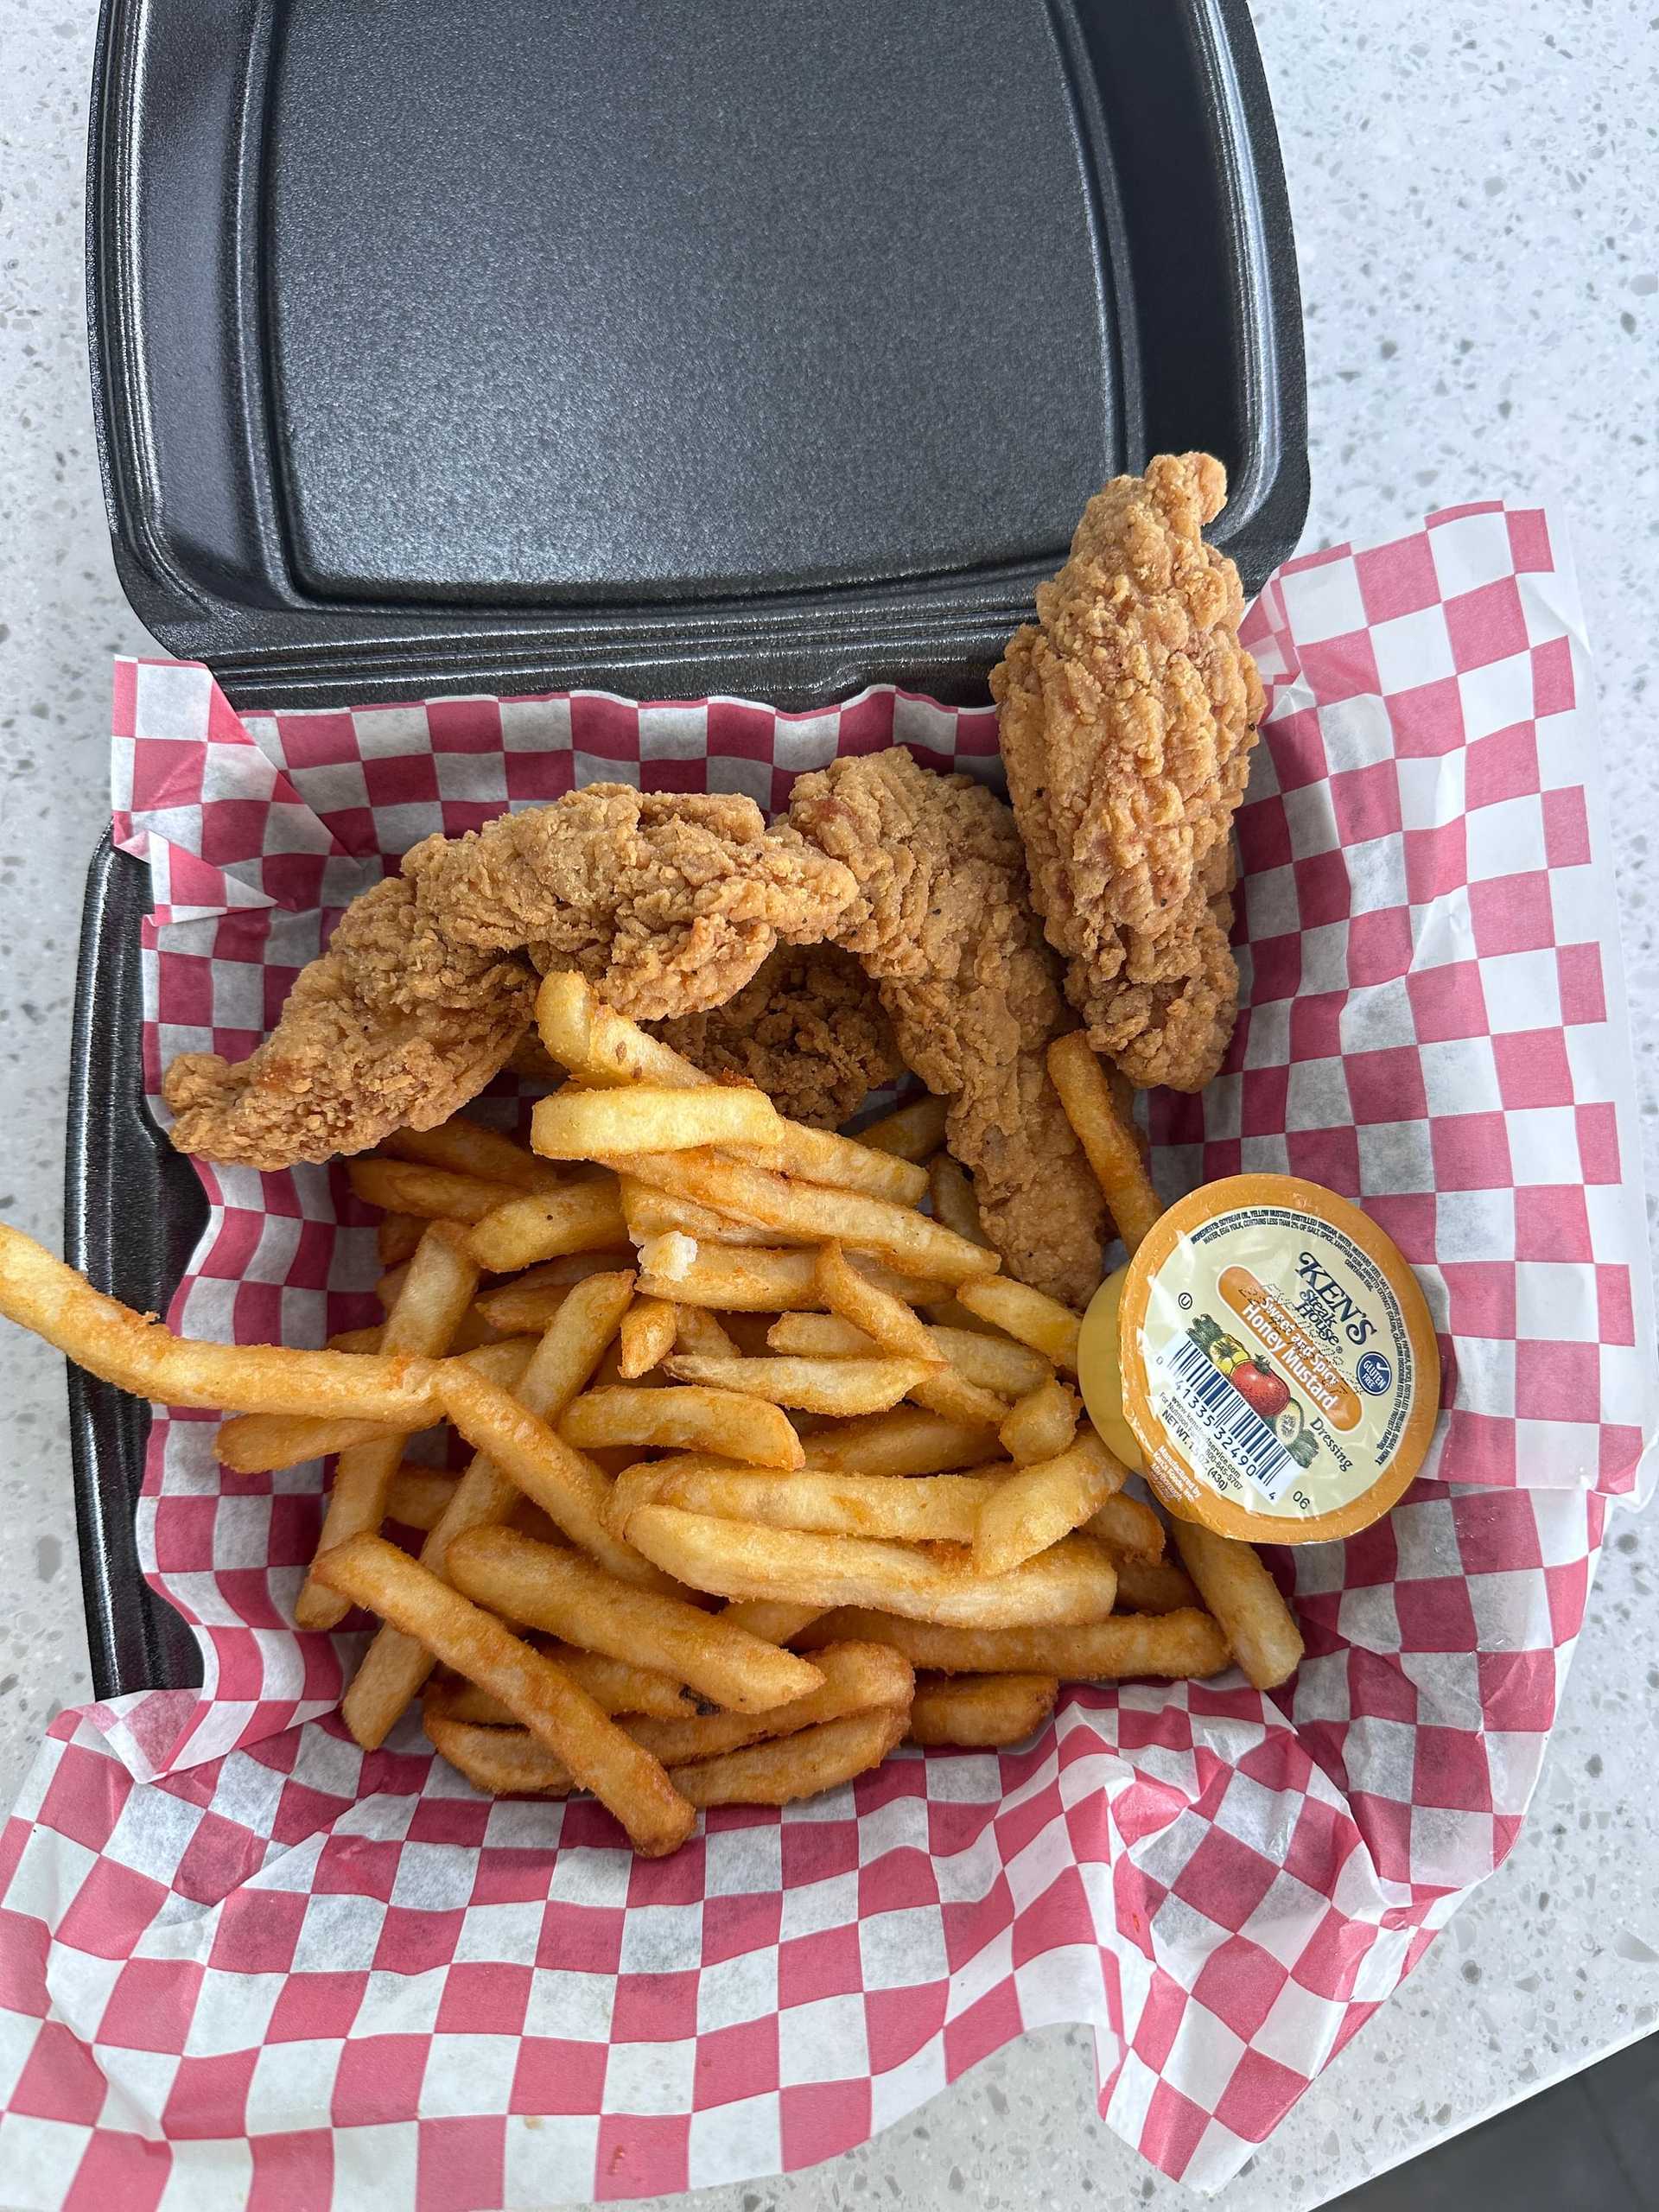 Fried chicken tenders, fries, and honey mustard sauce in a black takeout box on a checkered paper.